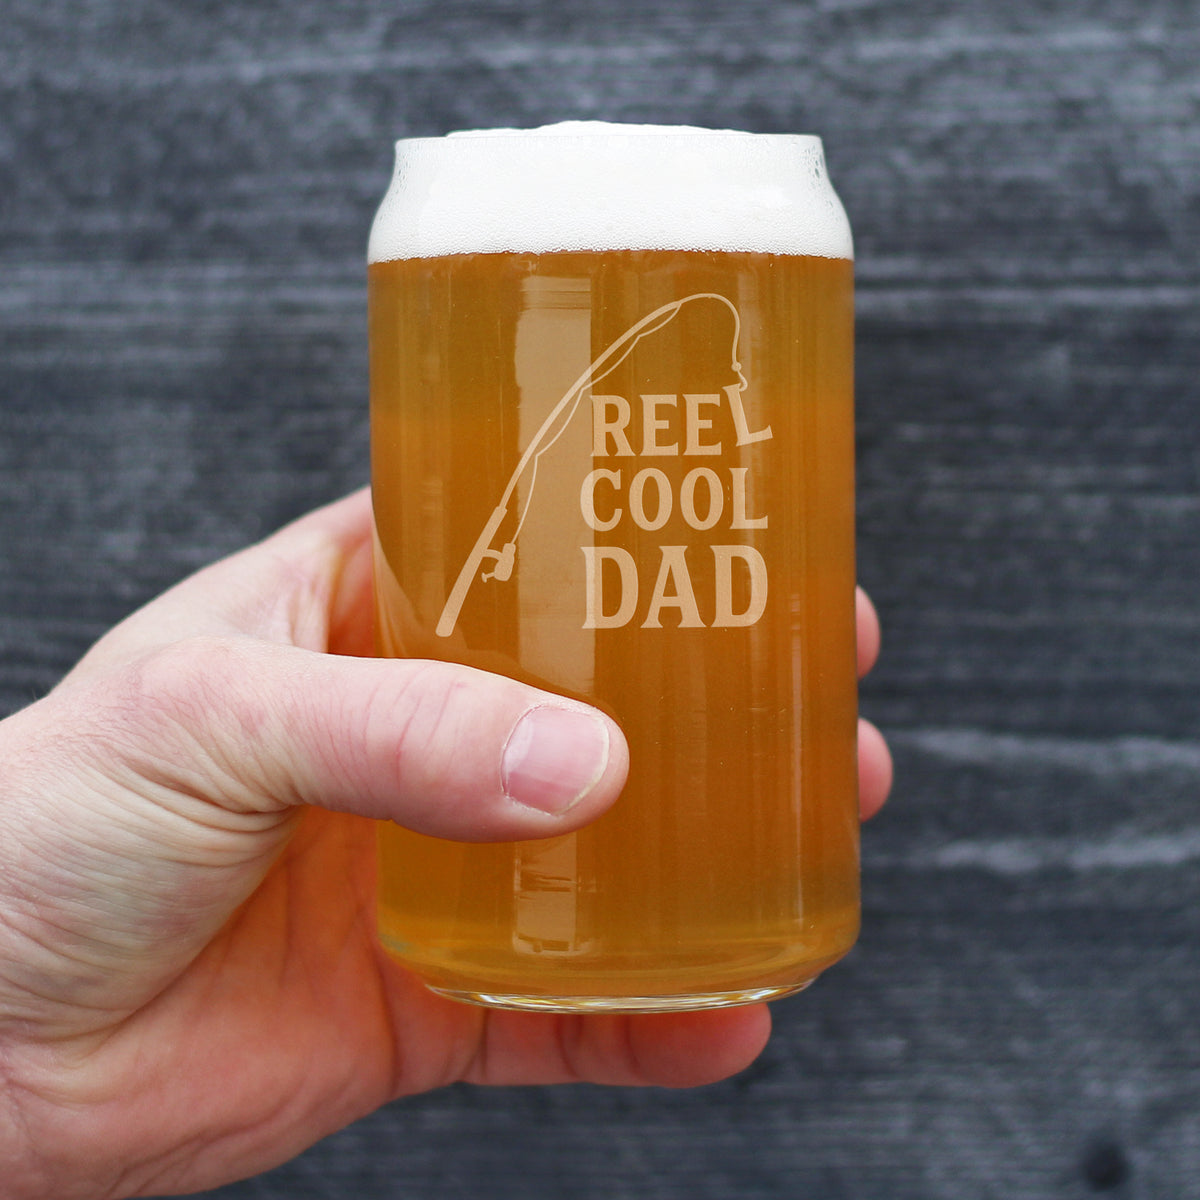 Reel Cool Dad - Beer Can Pint Glass - Funny Fishing Gifts for Fisherman Dads - Fun Fish 16 oz Cups